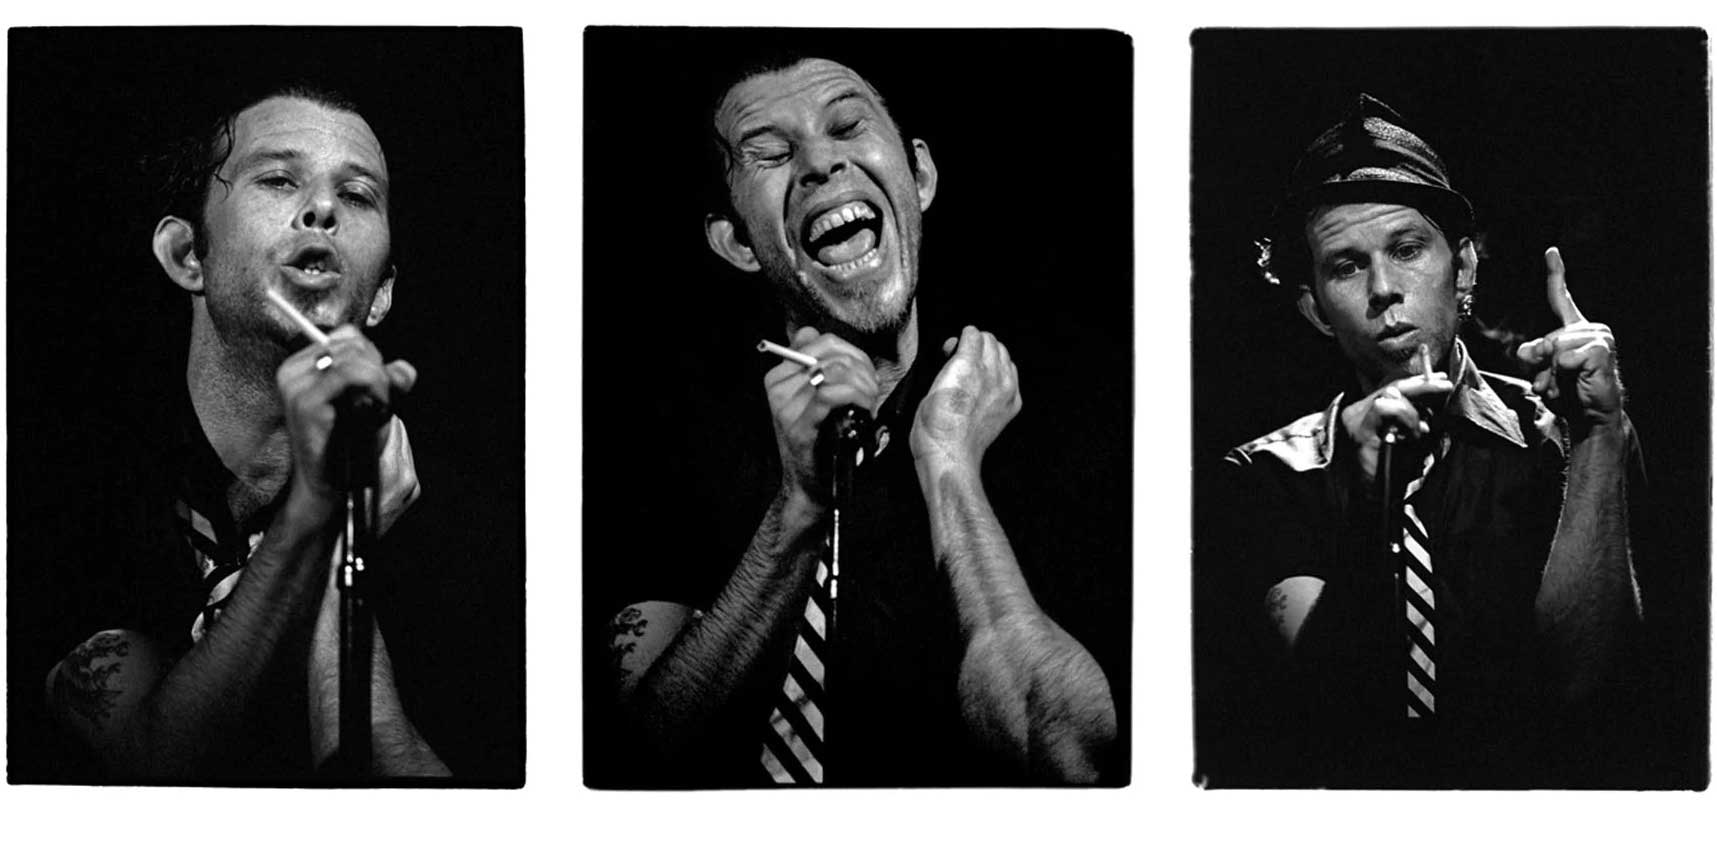 Tom Waits Performing at the Troubadour, Los Angeles, 1977 (Triptych)